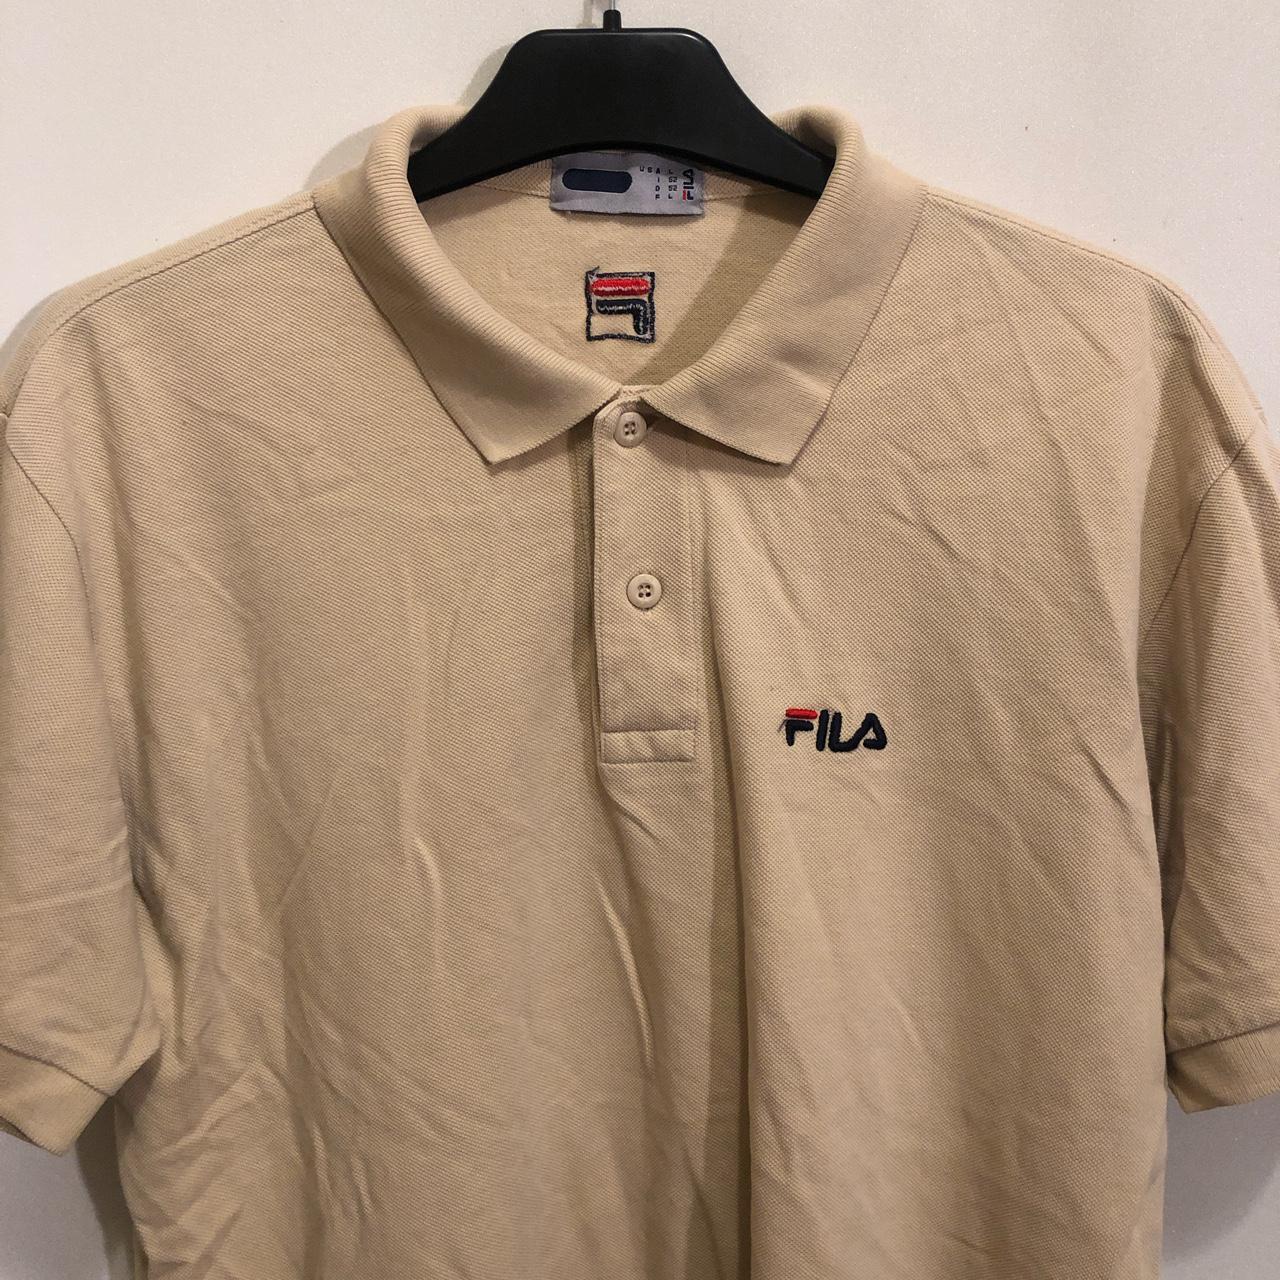 Fila Vintage Tanned Polo Shirt with Embroidered... - Depop